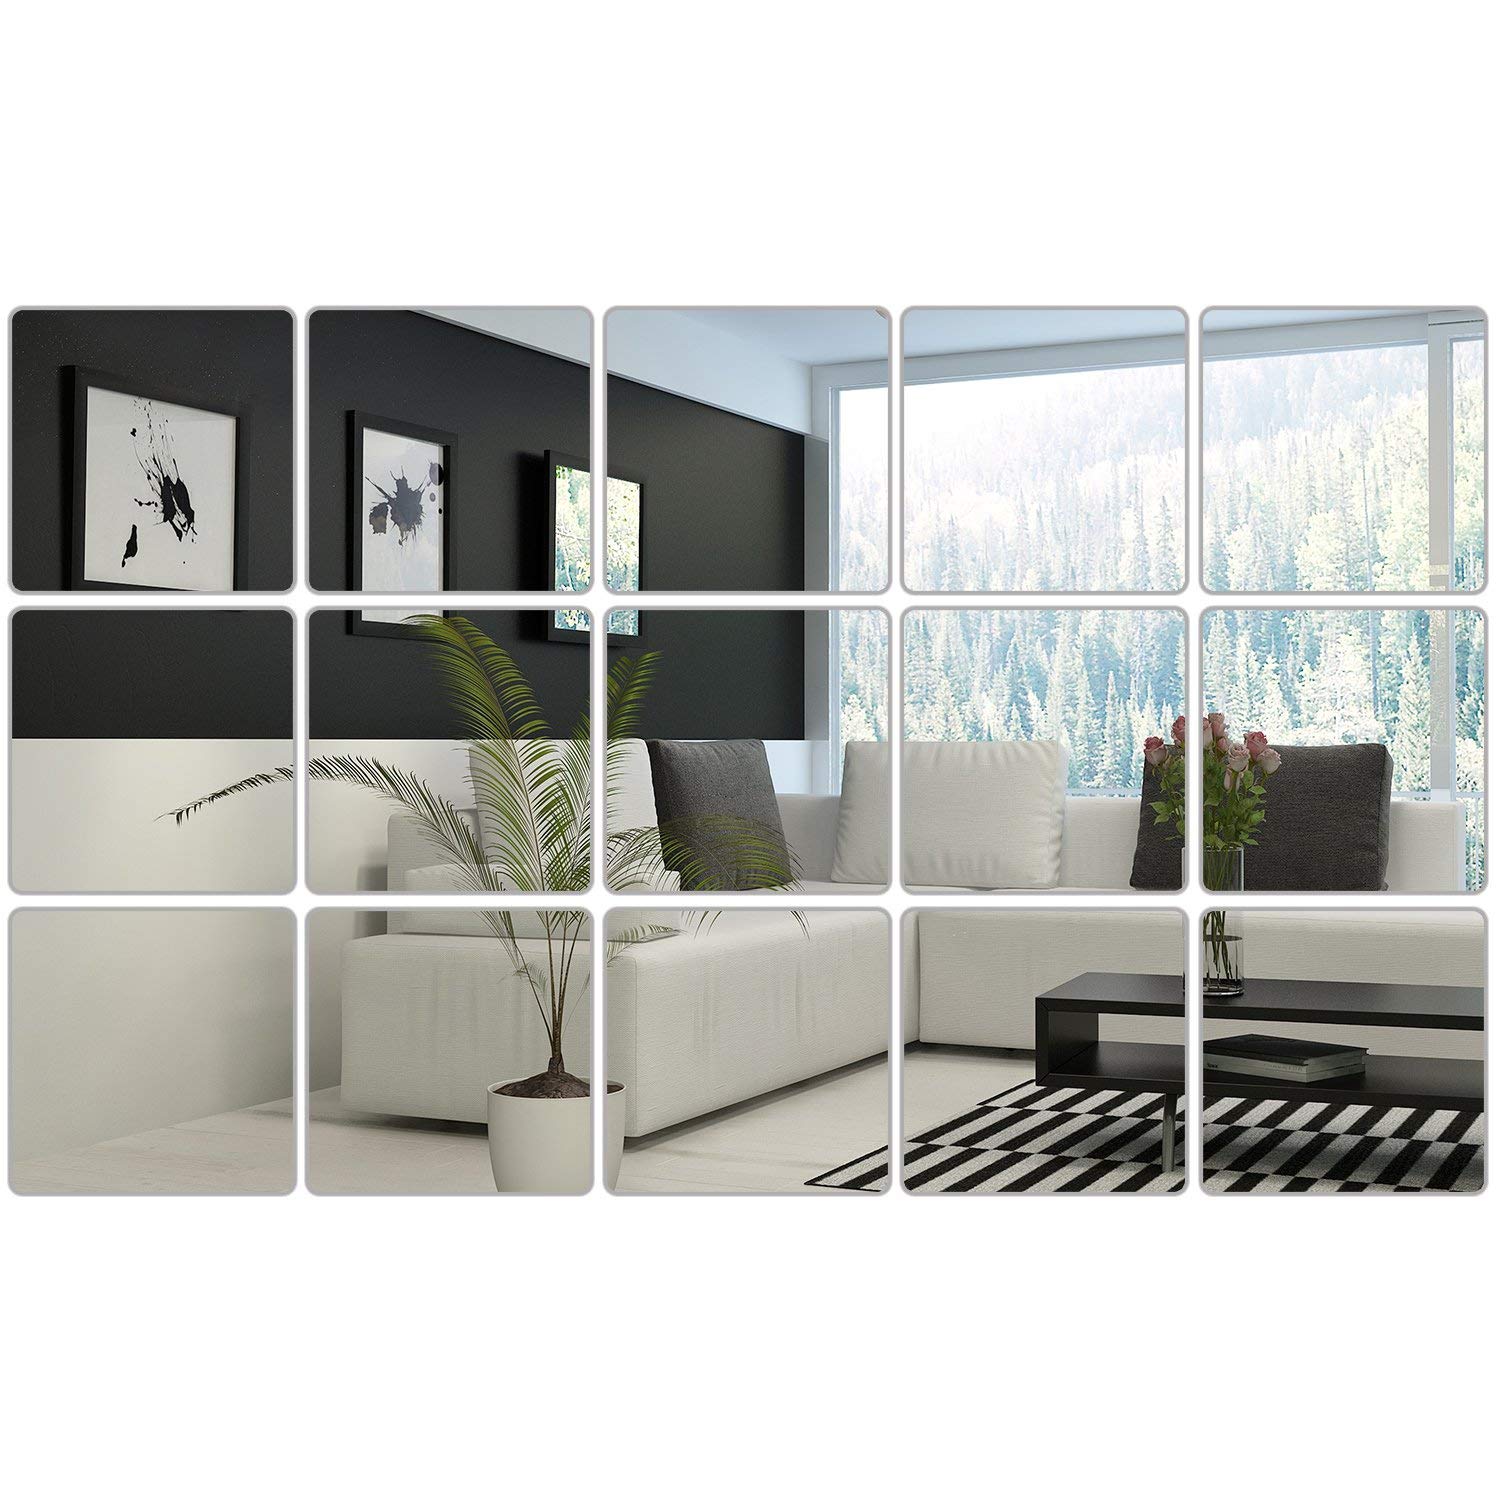 16PCS/9PCS 6 x 6 Inches Mirror Sheets Square Mirror Decals Self Adhesive  Mirror Tiles Non-Glass Mirror Stickers